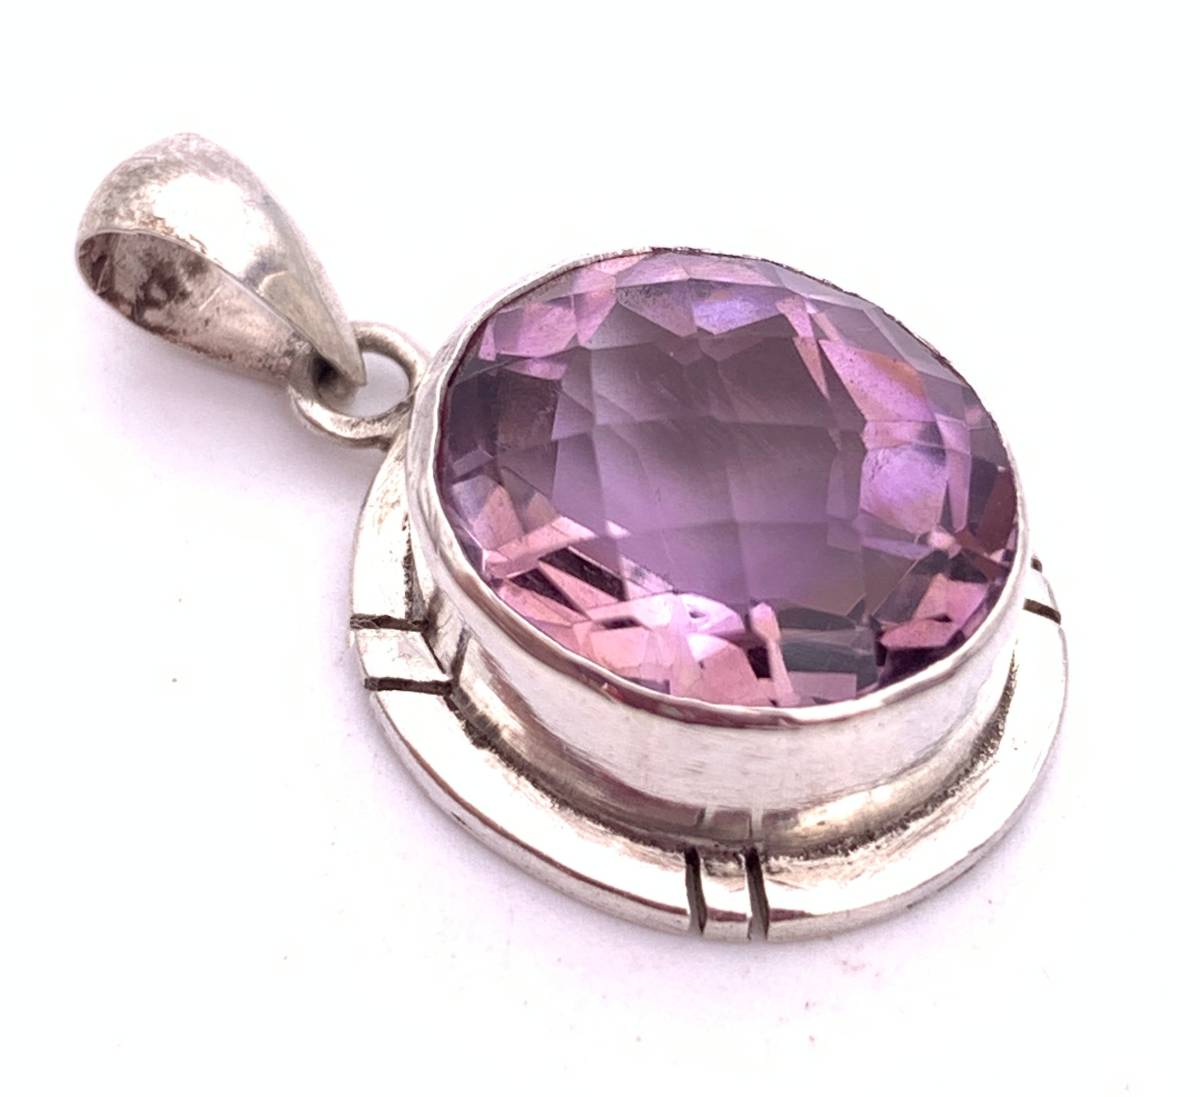  natural stone amethyst ( purple crystal )silver925 top -0AS6